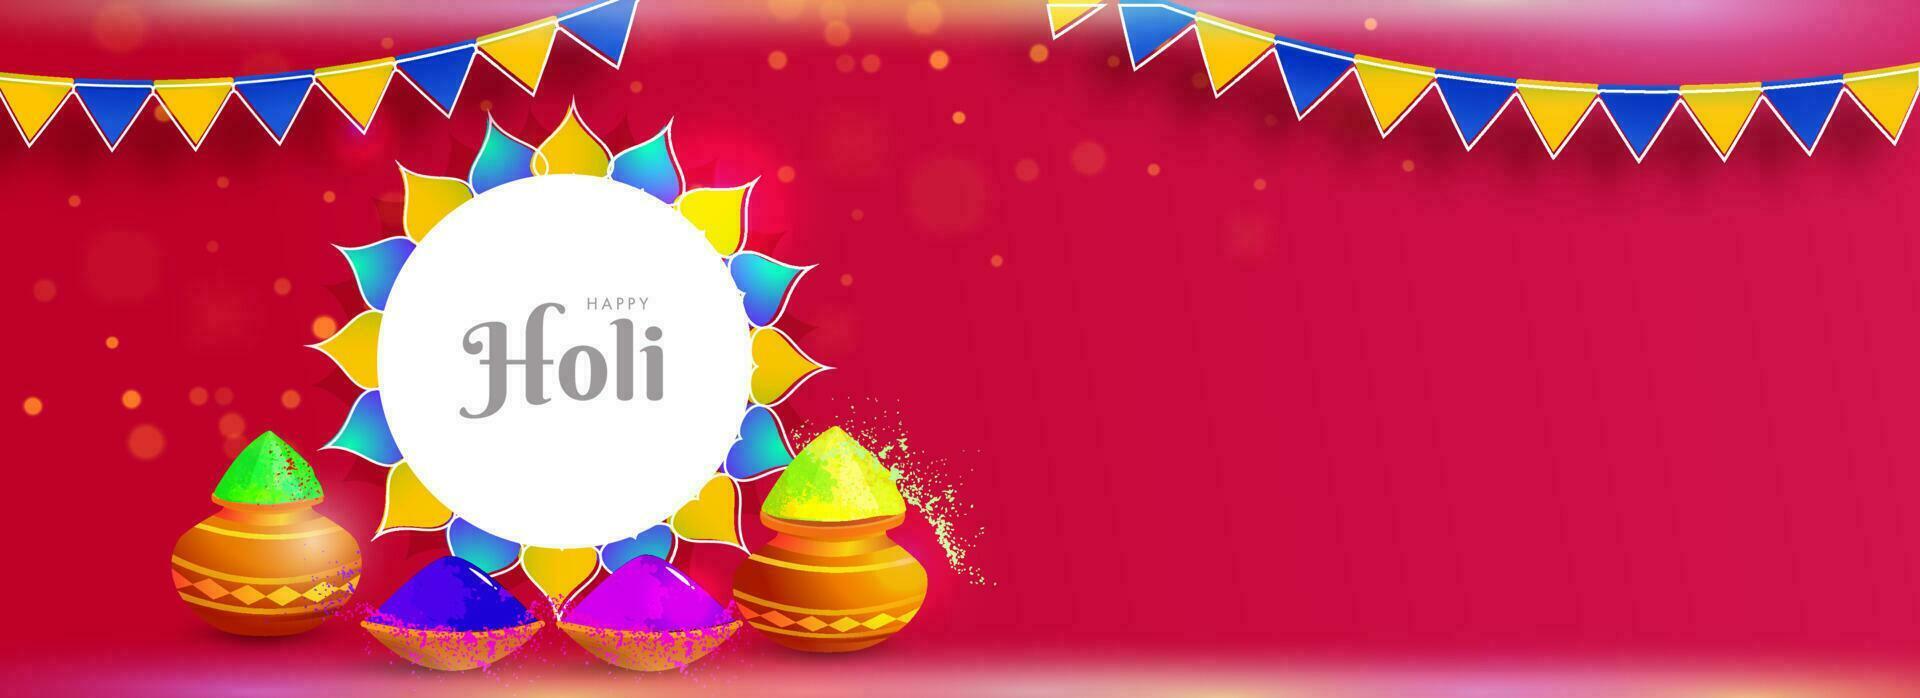 Happy Holi header or banner design with color pots on pink background decorated with party flags. vector